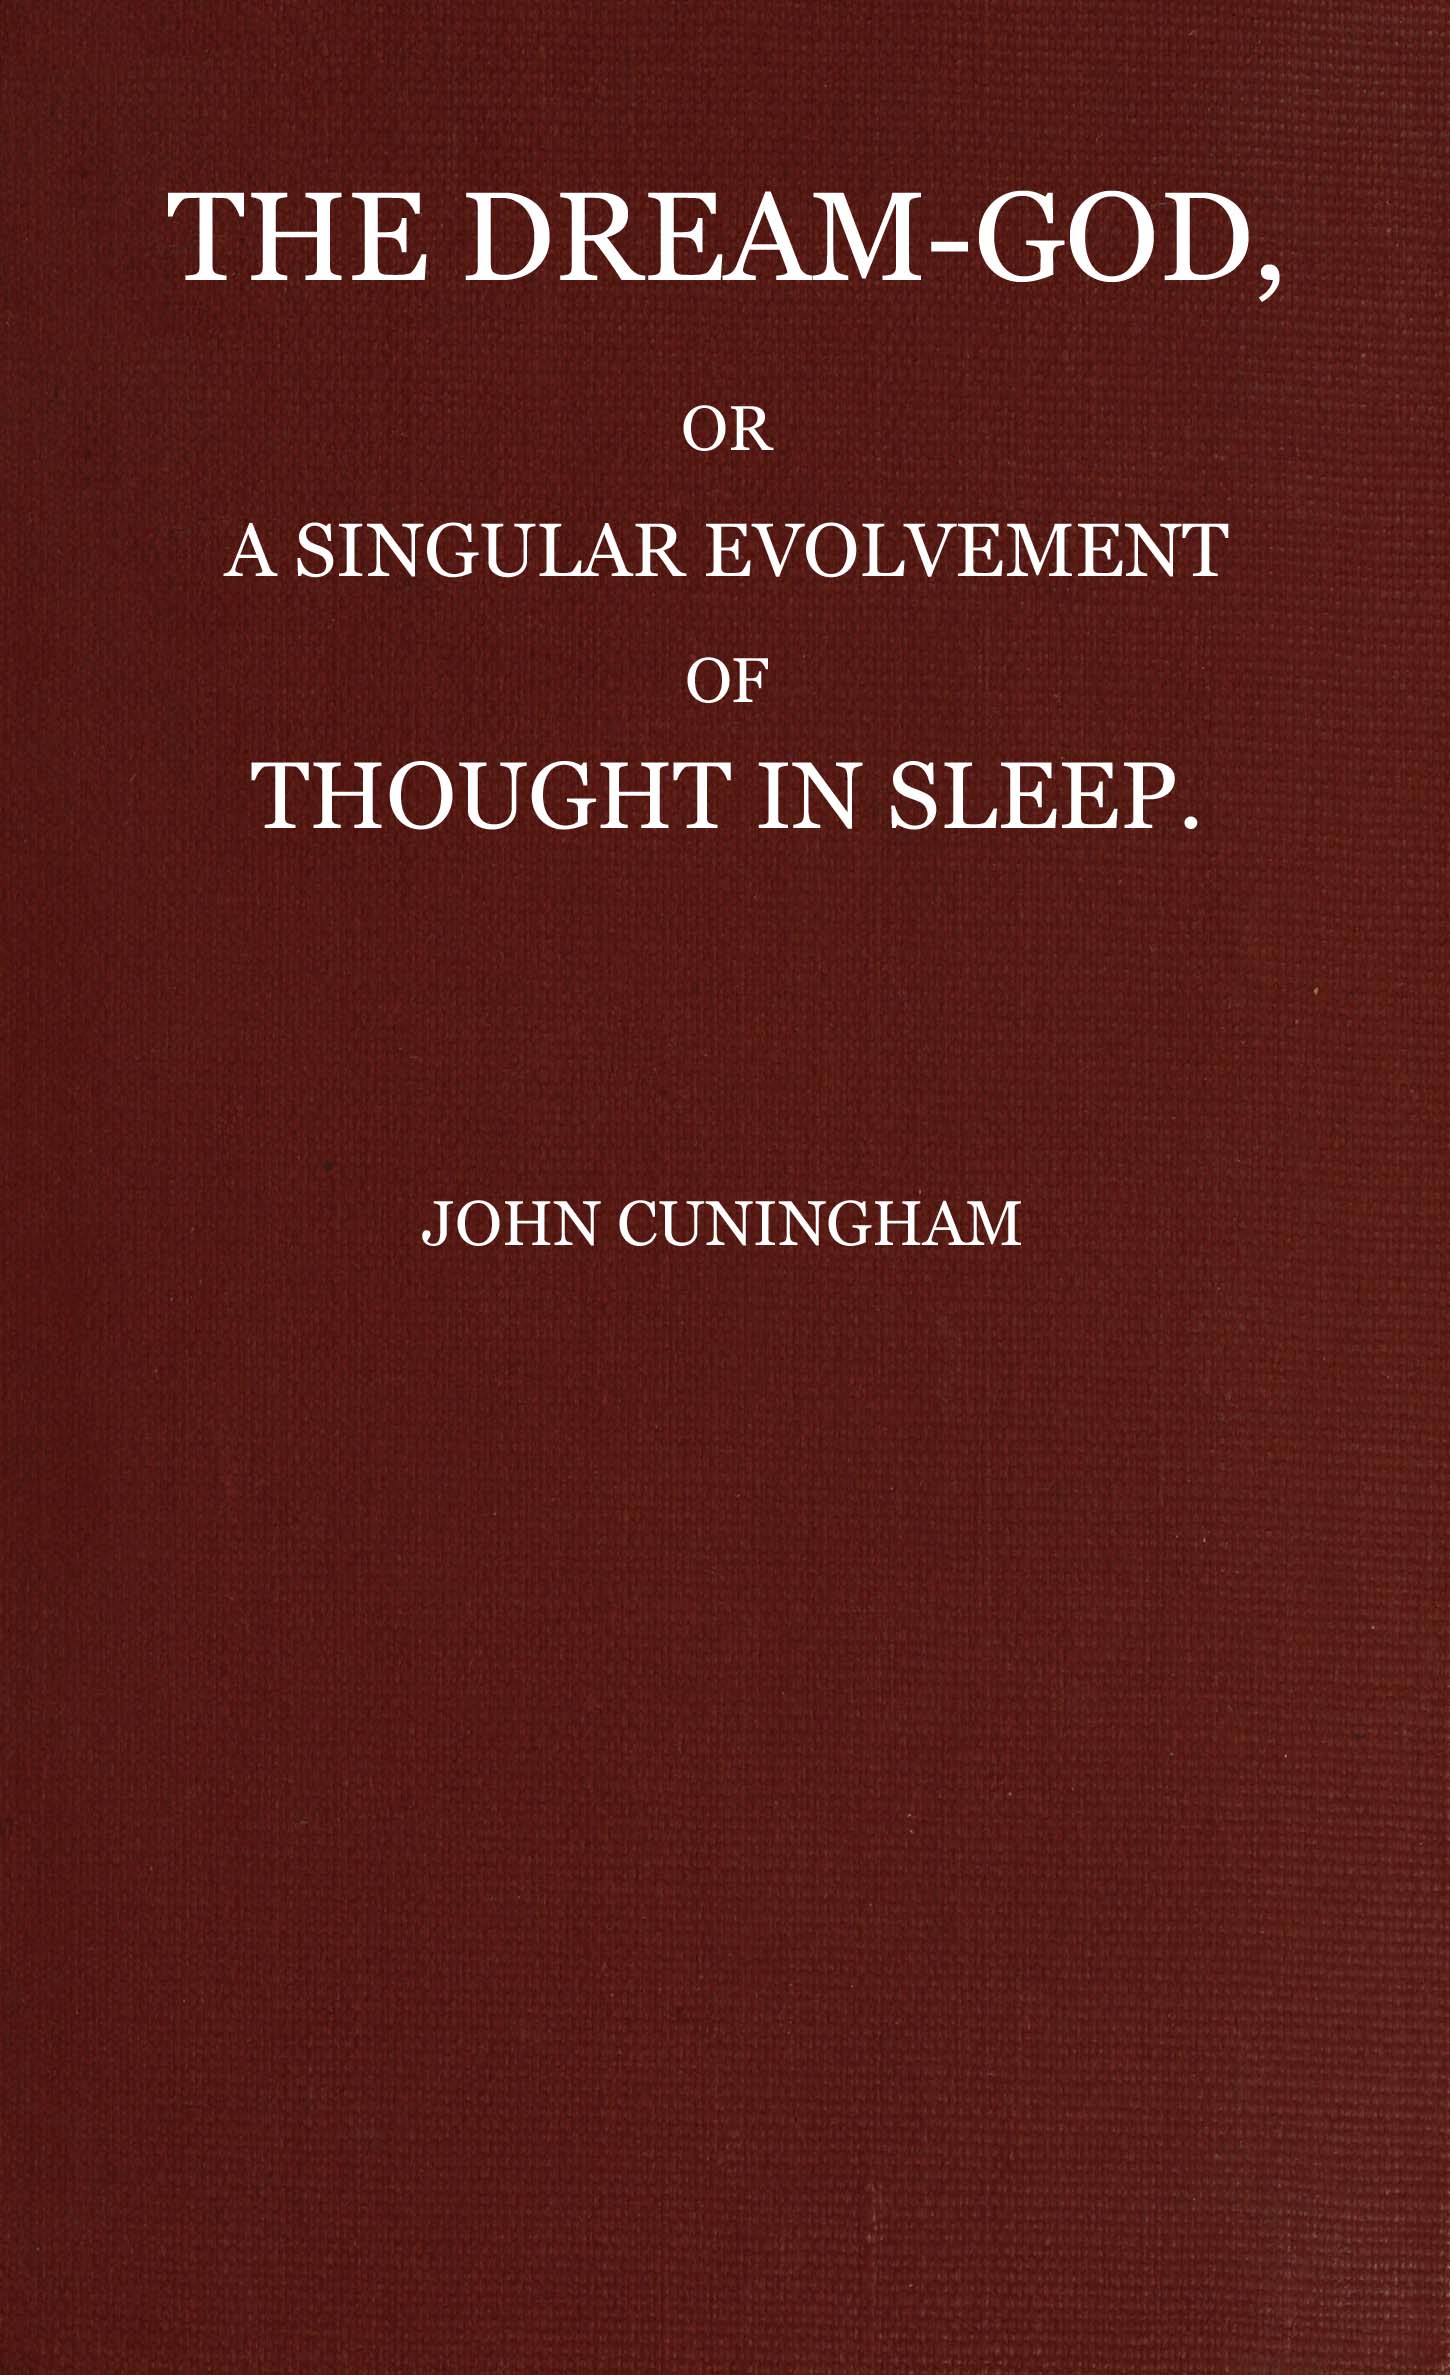 The Dream-God, or, A Singular Evolvement of Thought in Sleep